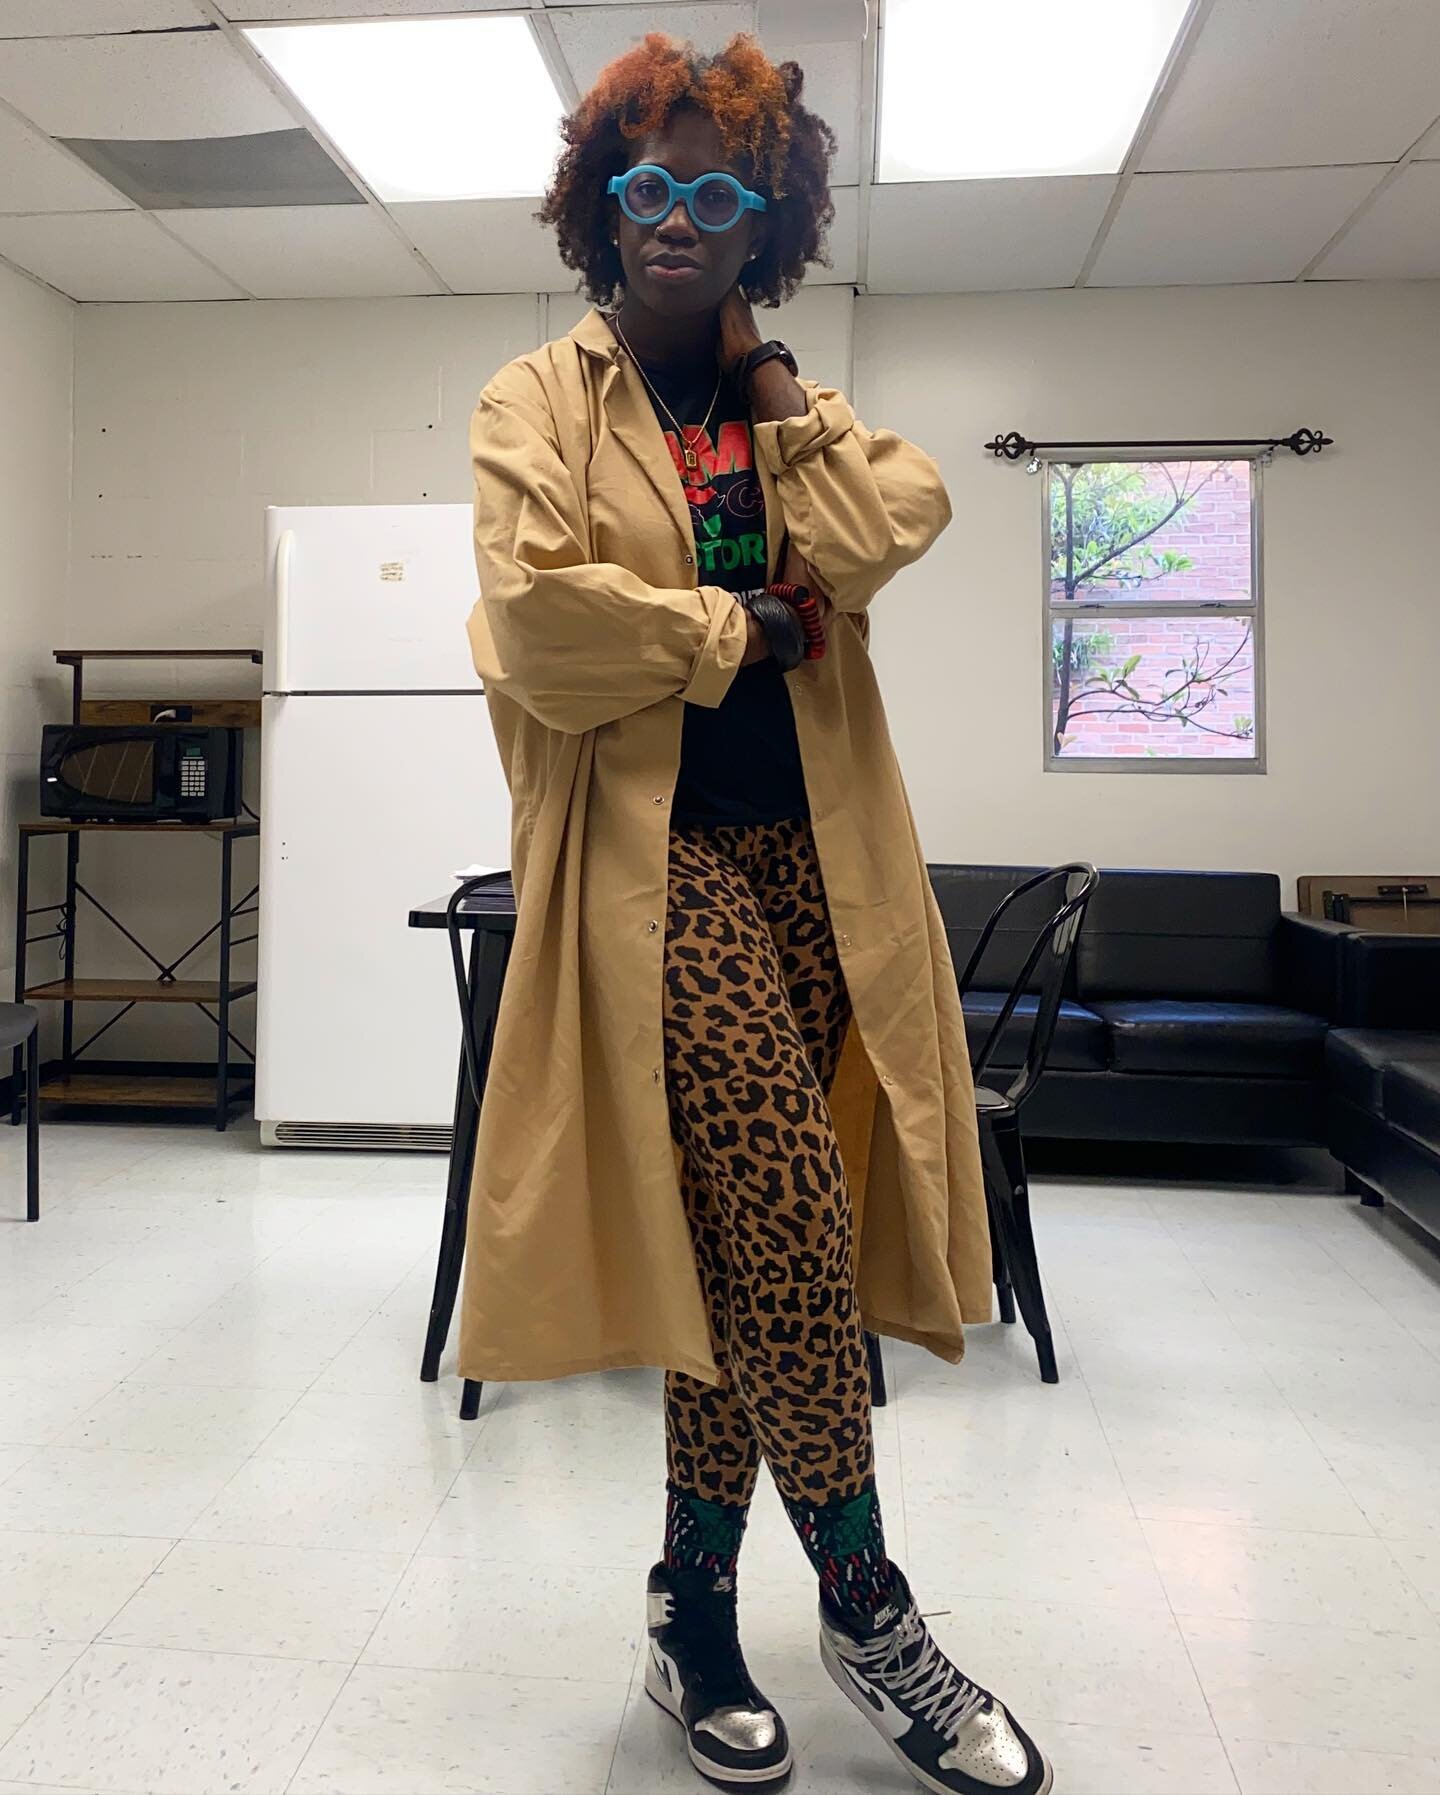 One of my advisees told me not to be out here being grown during Spring Break.

I won&rsquo;t be taking her advice&hellip;

Lab jacket: thrifted
Tee: school
Leggings: @target 
Socks: @ninachanel x @jumpman23 
Shoes: @jumpman23 

#livelovely #workclot